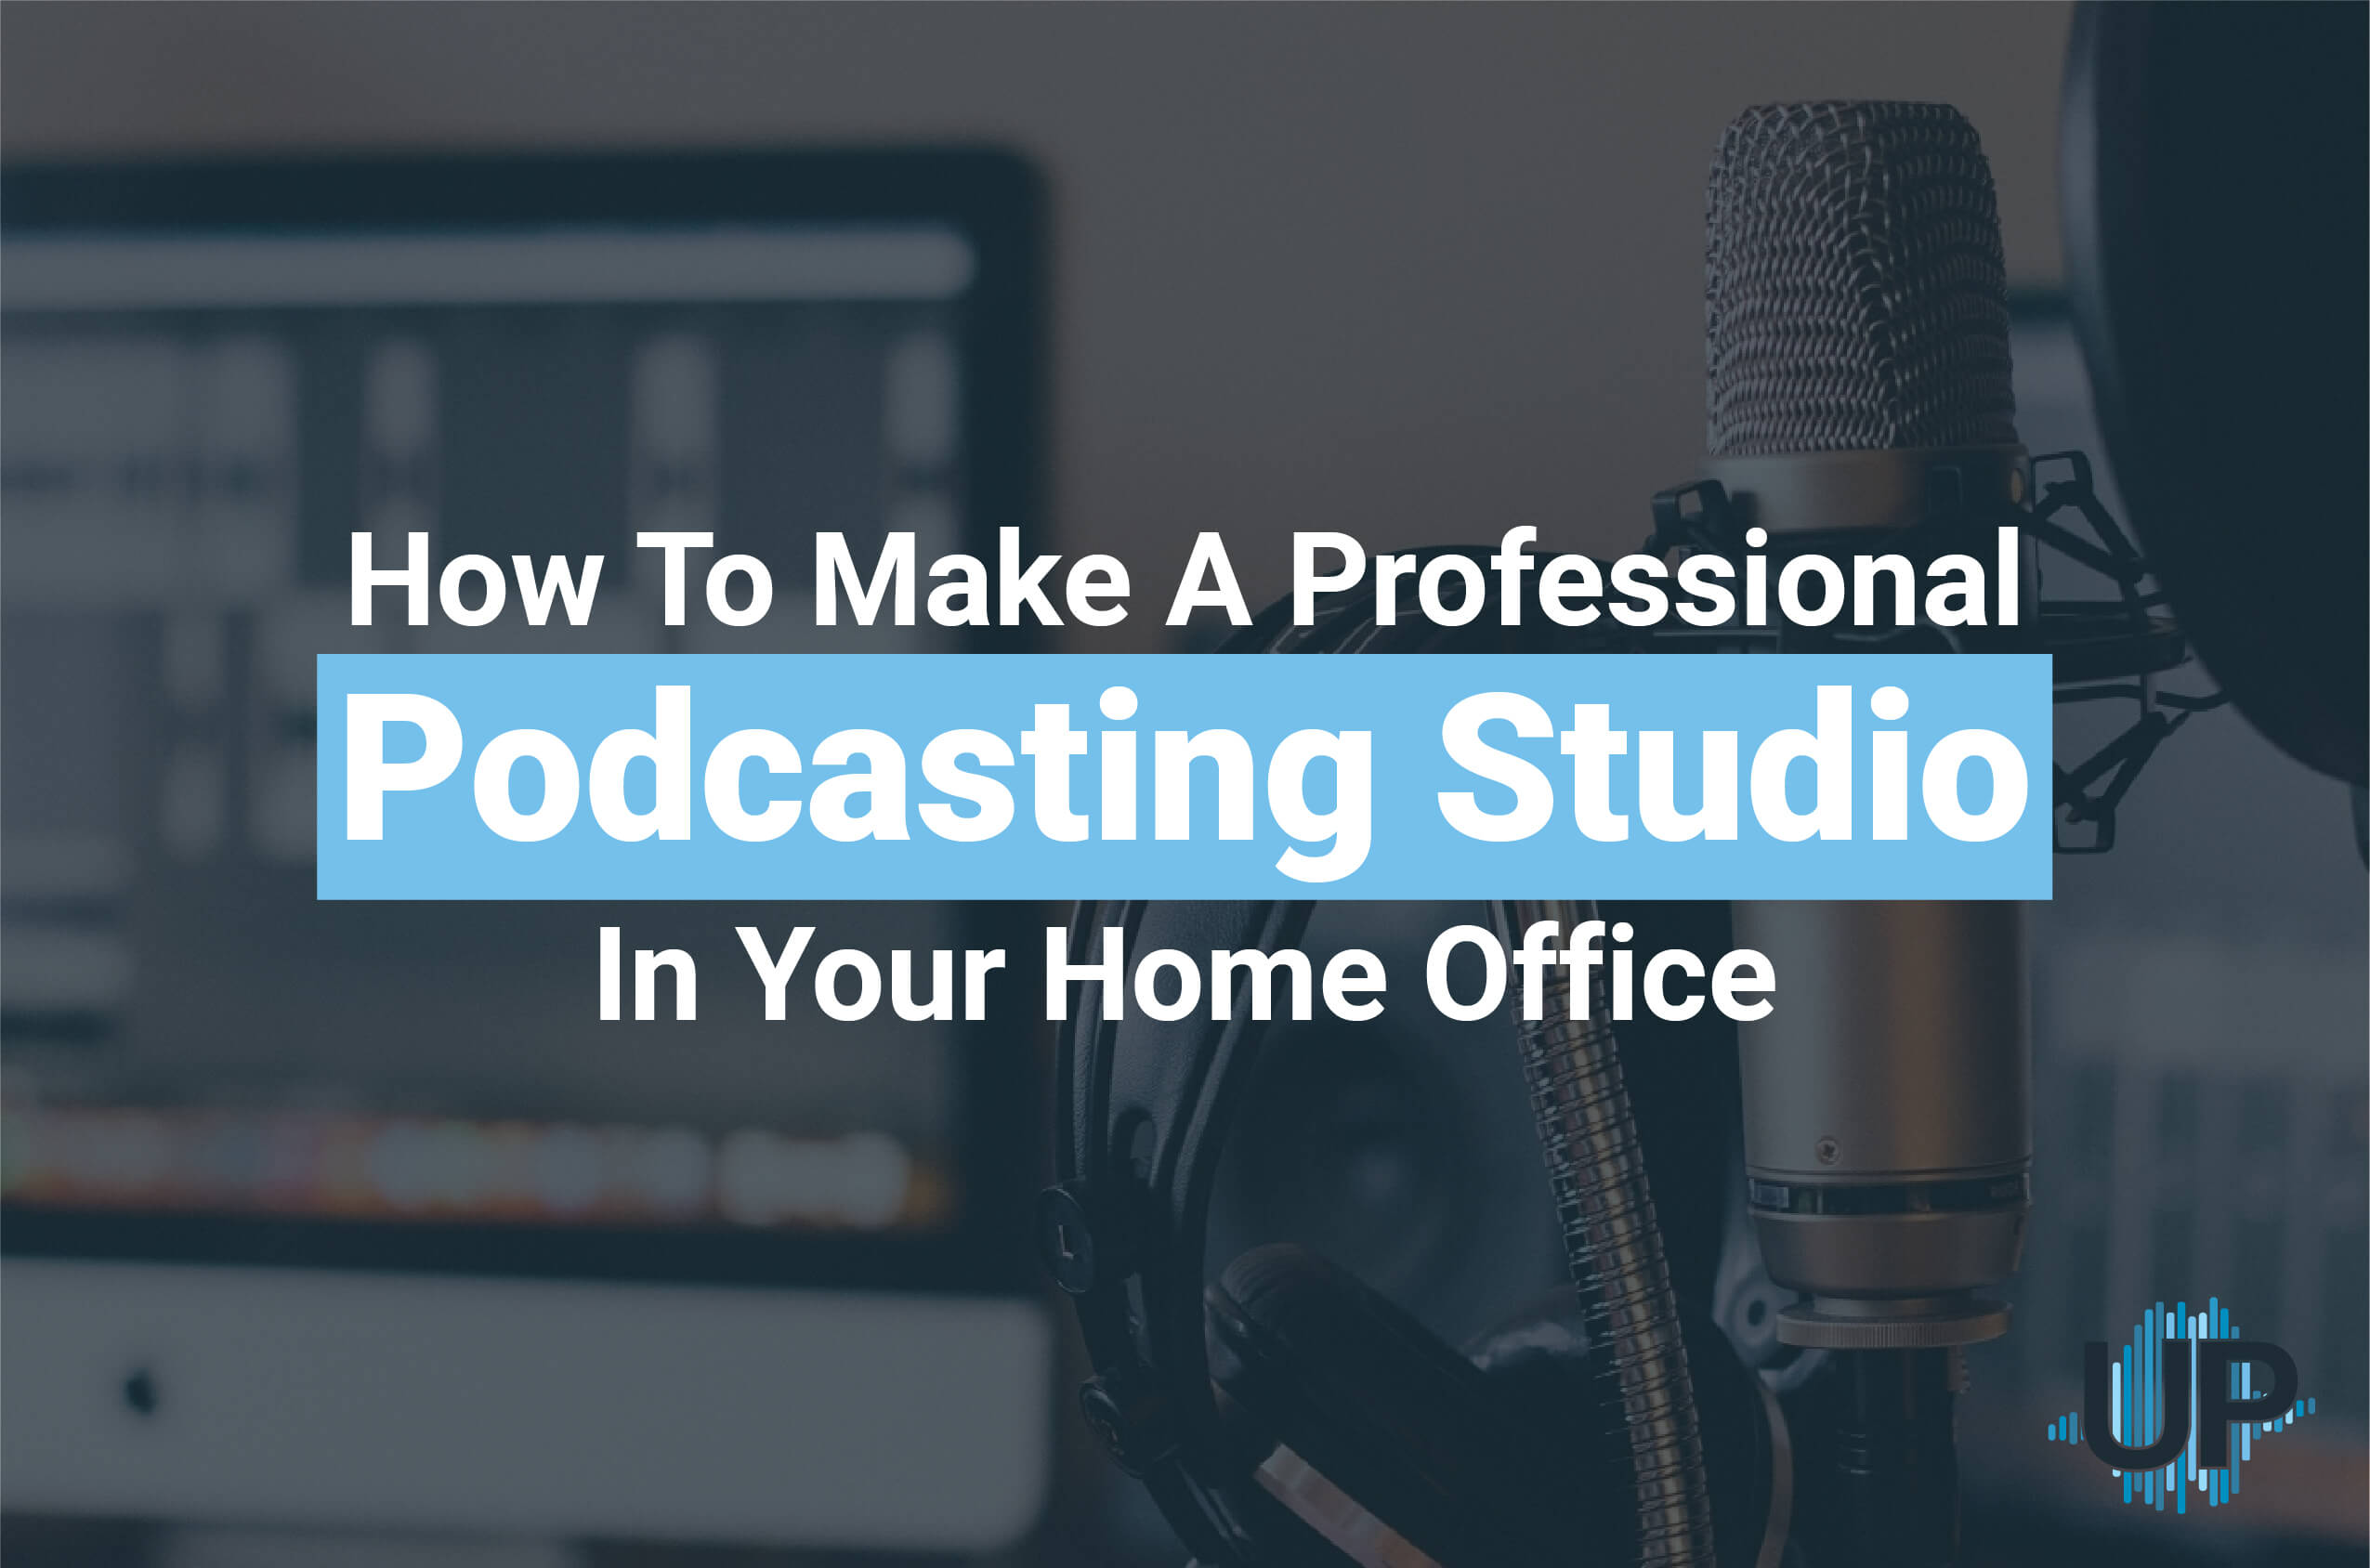 How To Make A Professional Podcasting Studio In Your Home Office 01